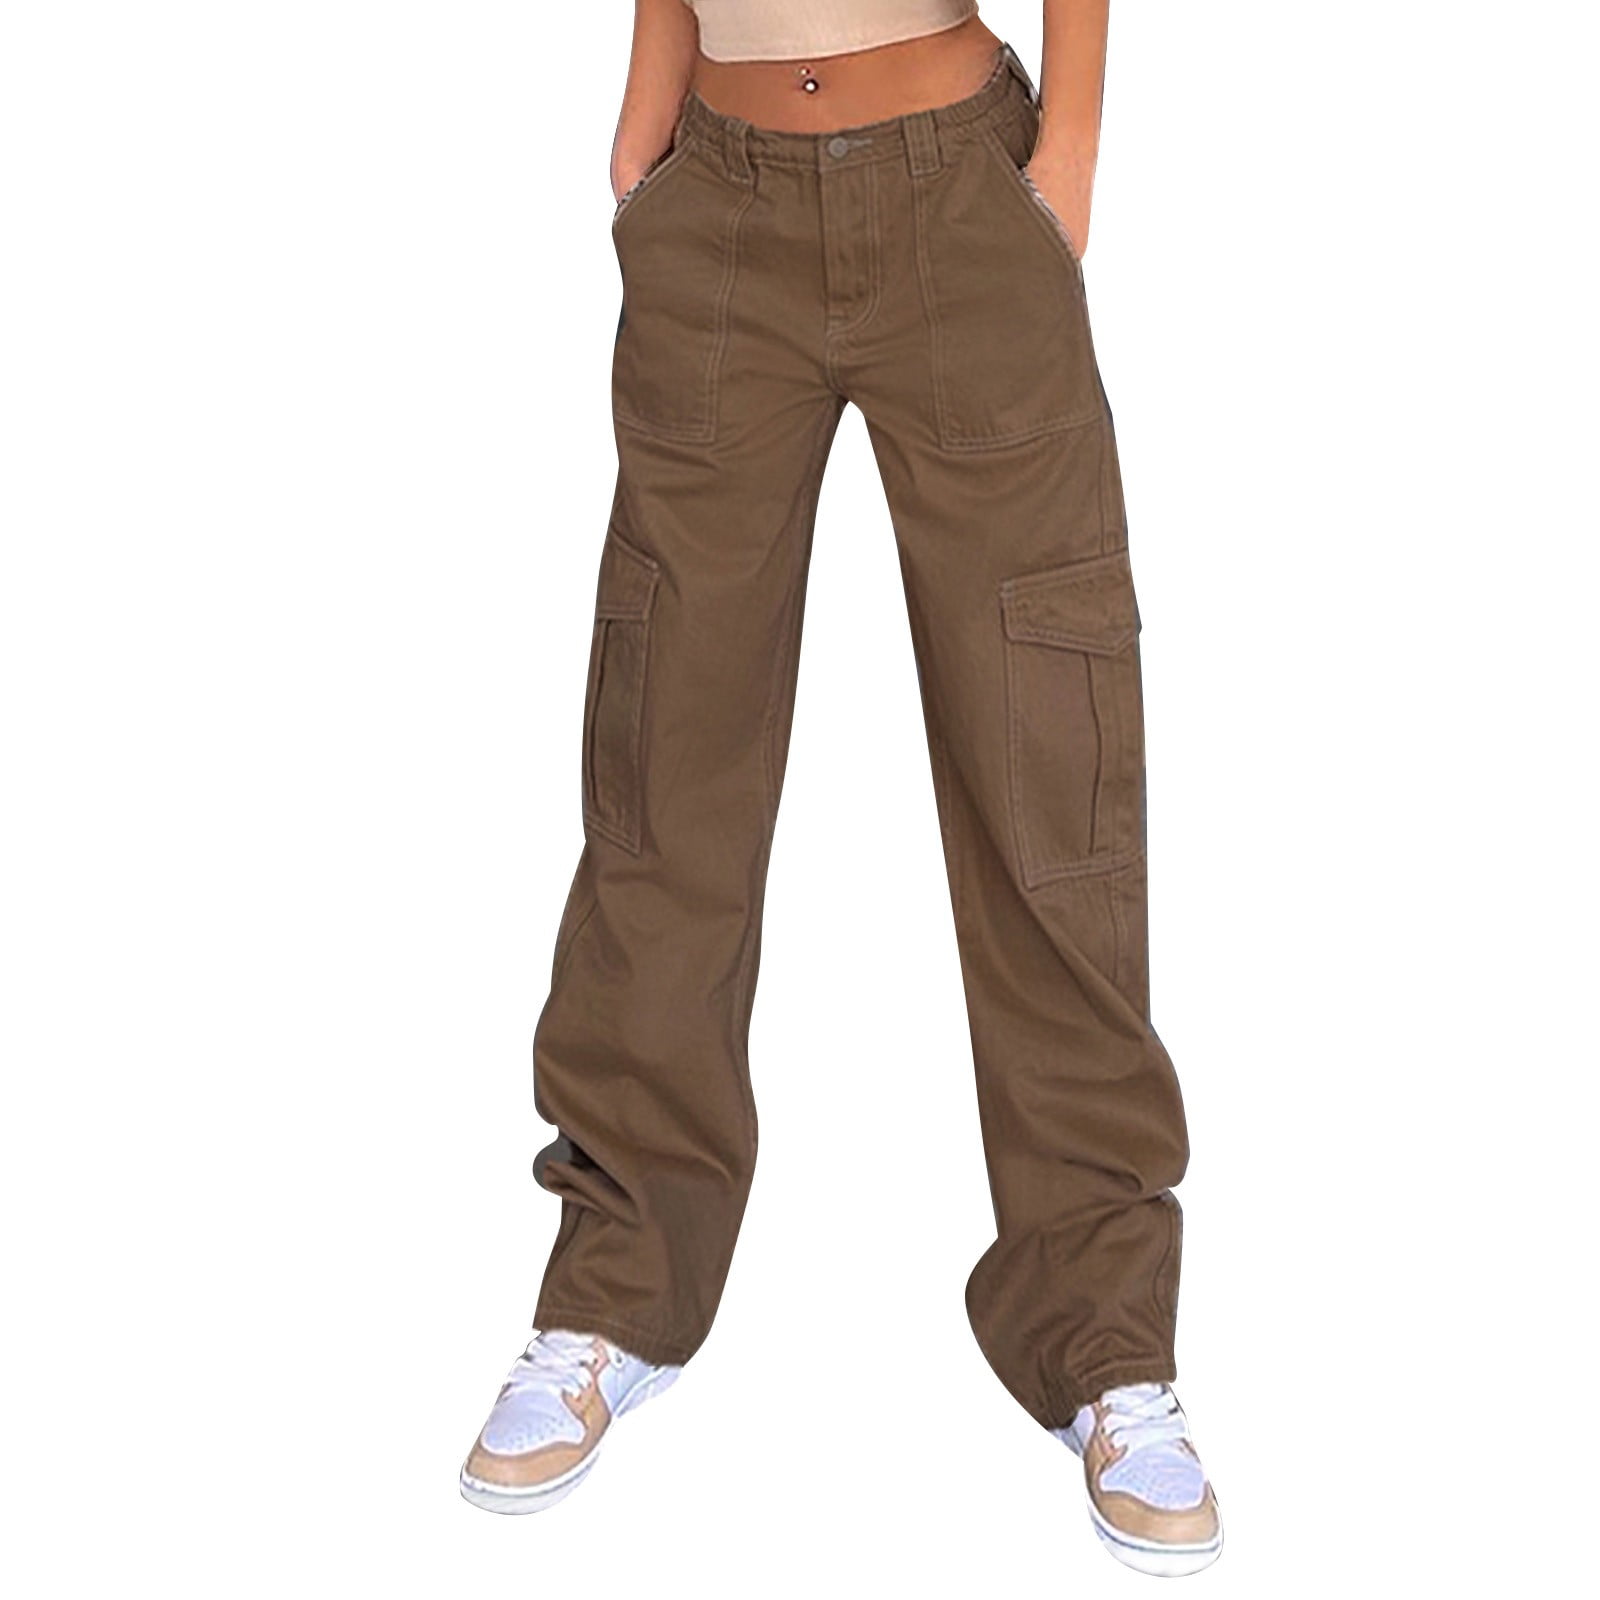 ketyyh-chn99 Tactical Pants Women's Petite Free Relaxed Fit